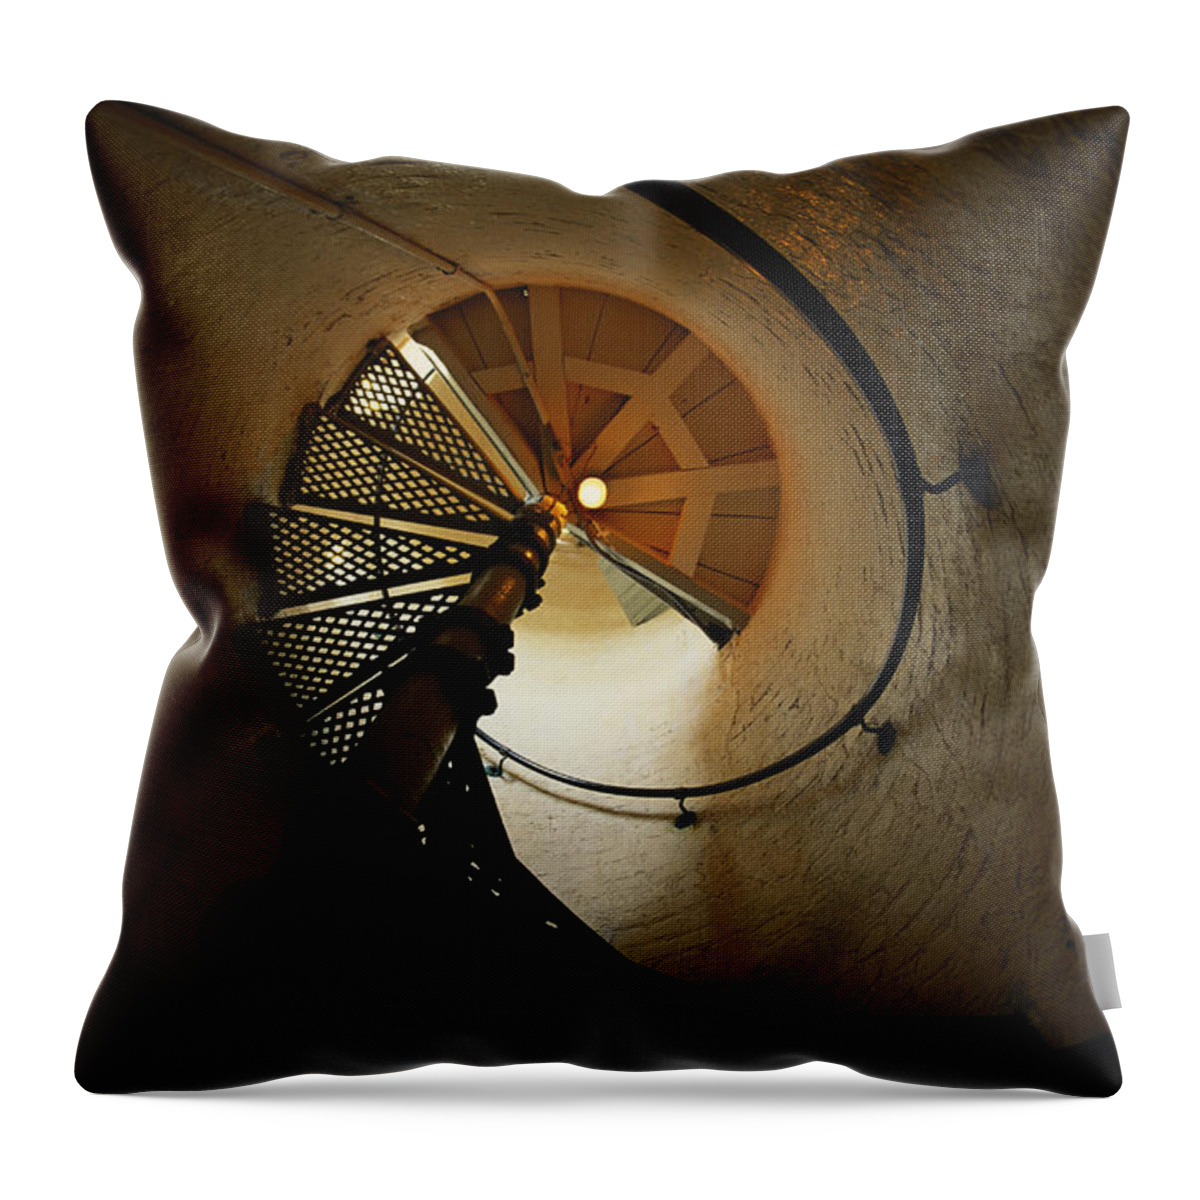 Stair Throw Pillow featuring the photograph Spiral Staircase by Gregory G Dimijian MD